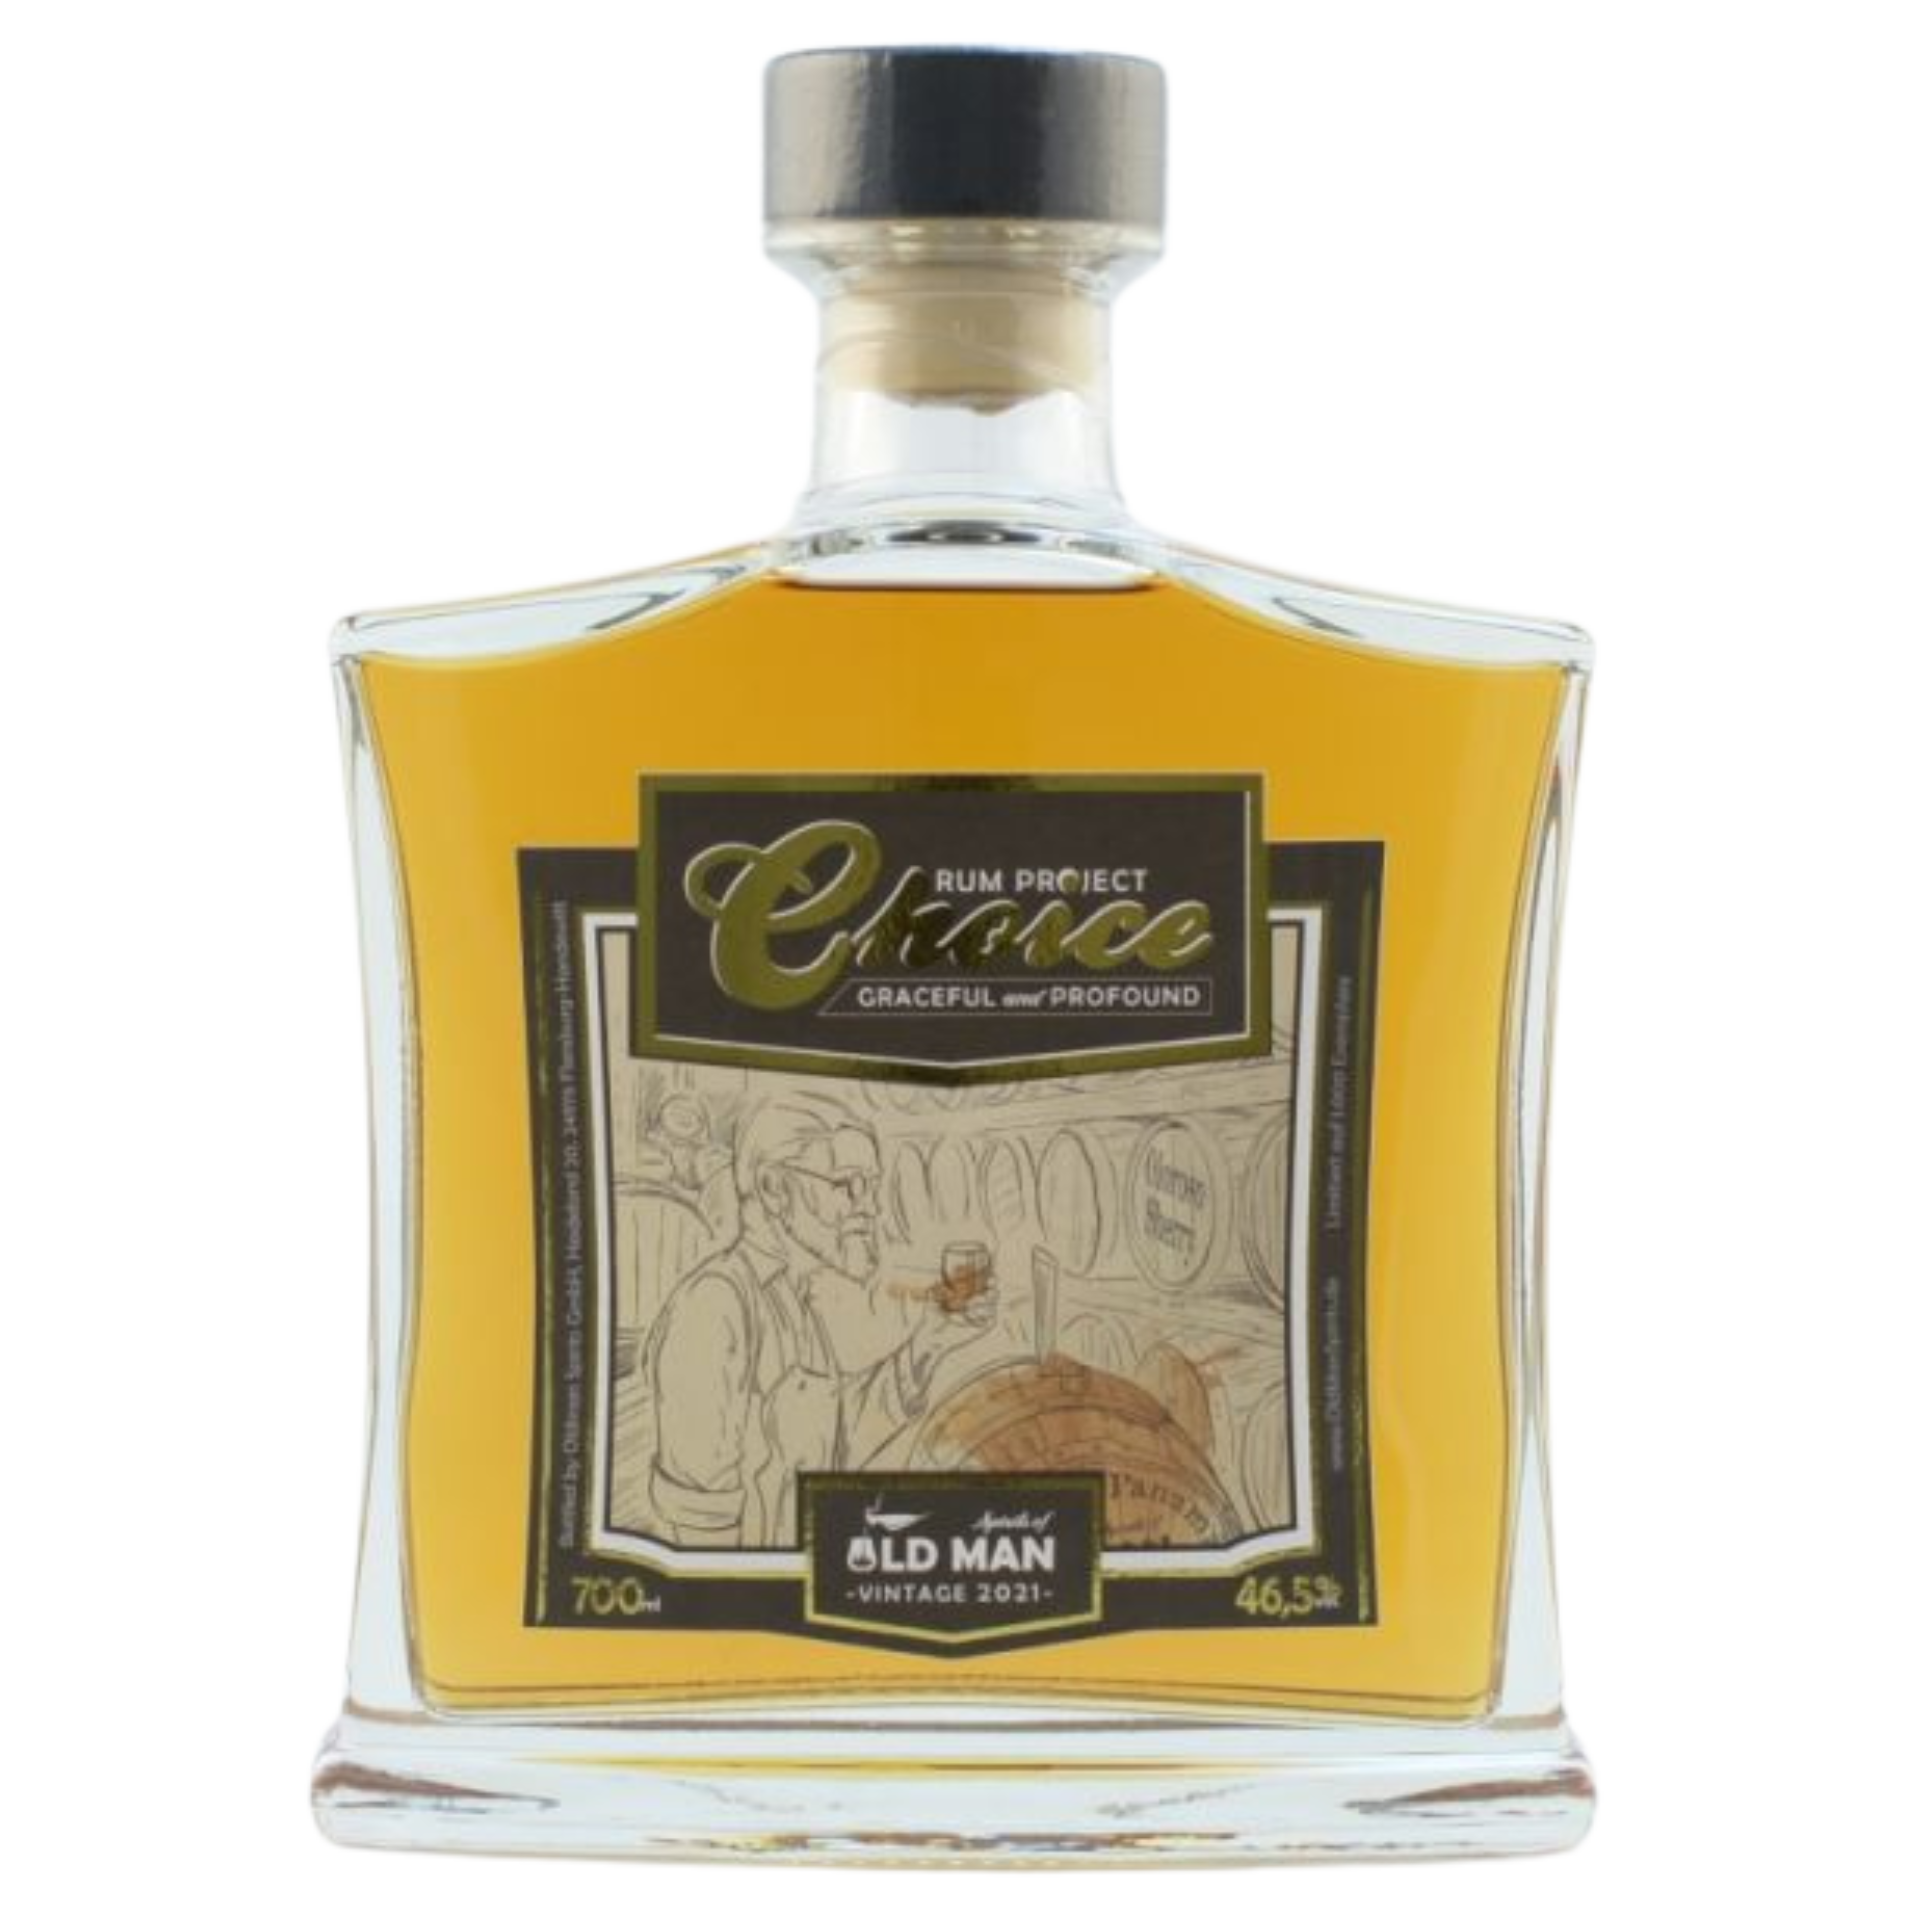 "Rum Project CHOICE" Vintage 2021 by Spirits of Old Man 46,5% 0,7l